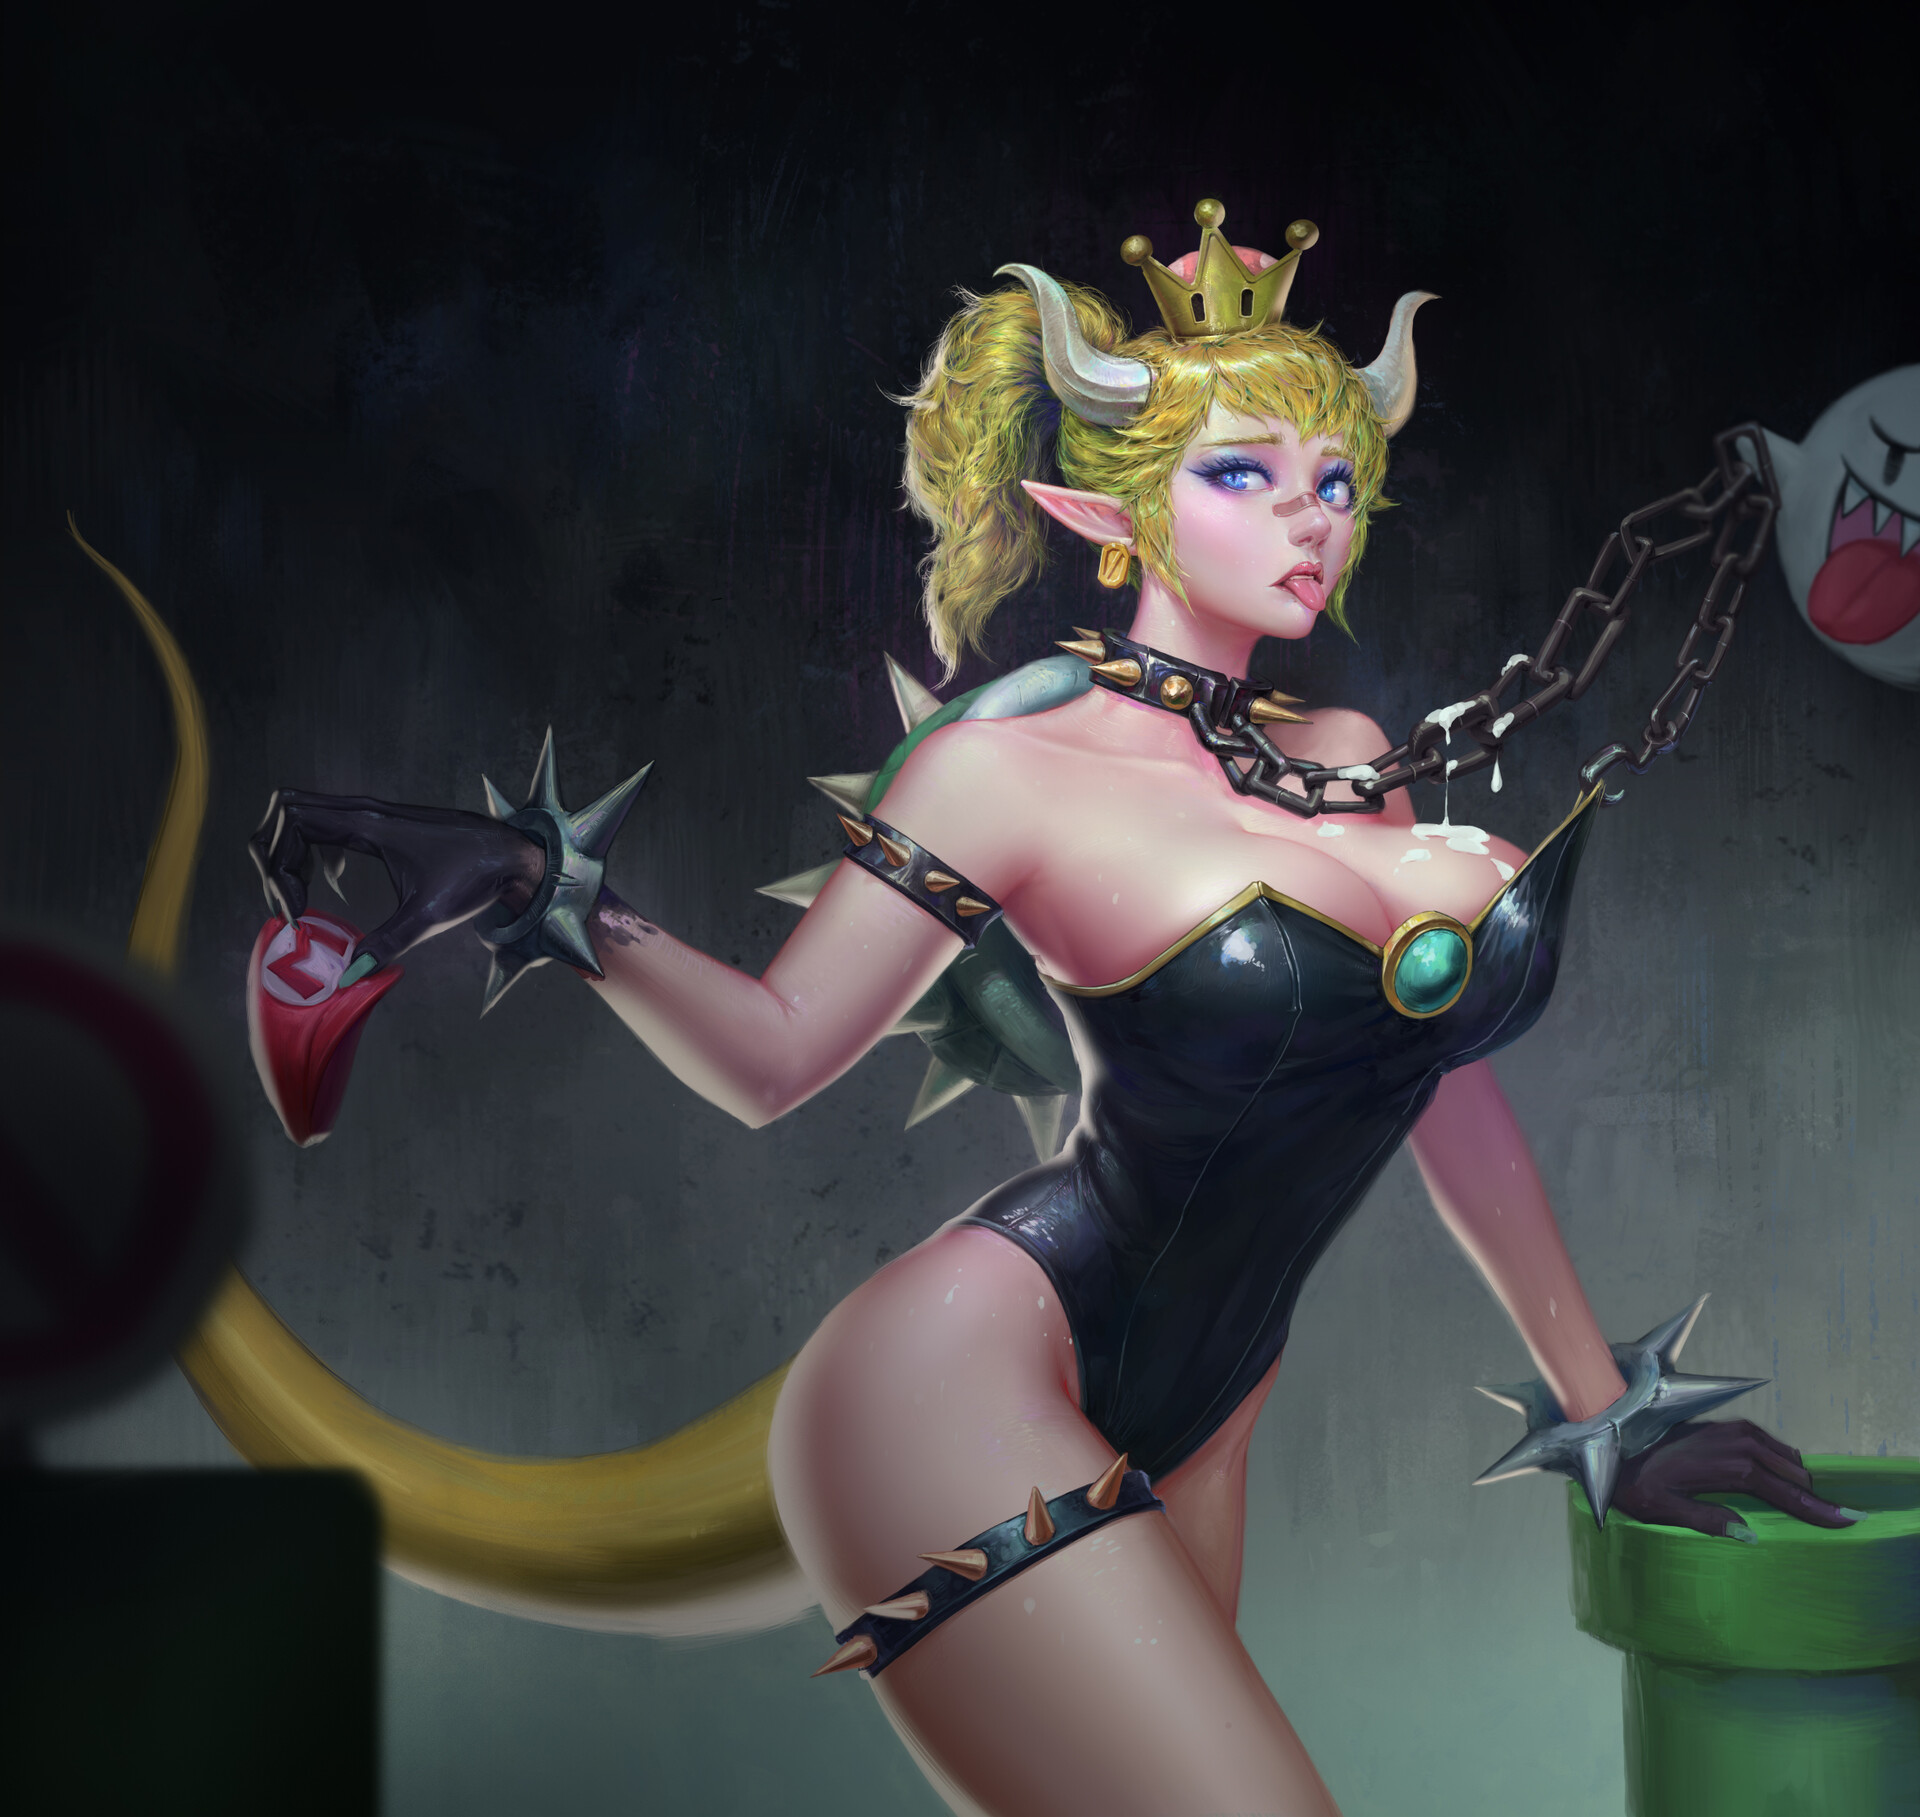 General 1920x1817 Bowsette cleavage blonde crown curvy blue eyes Mario Bros. chains artwork digital art tongue out